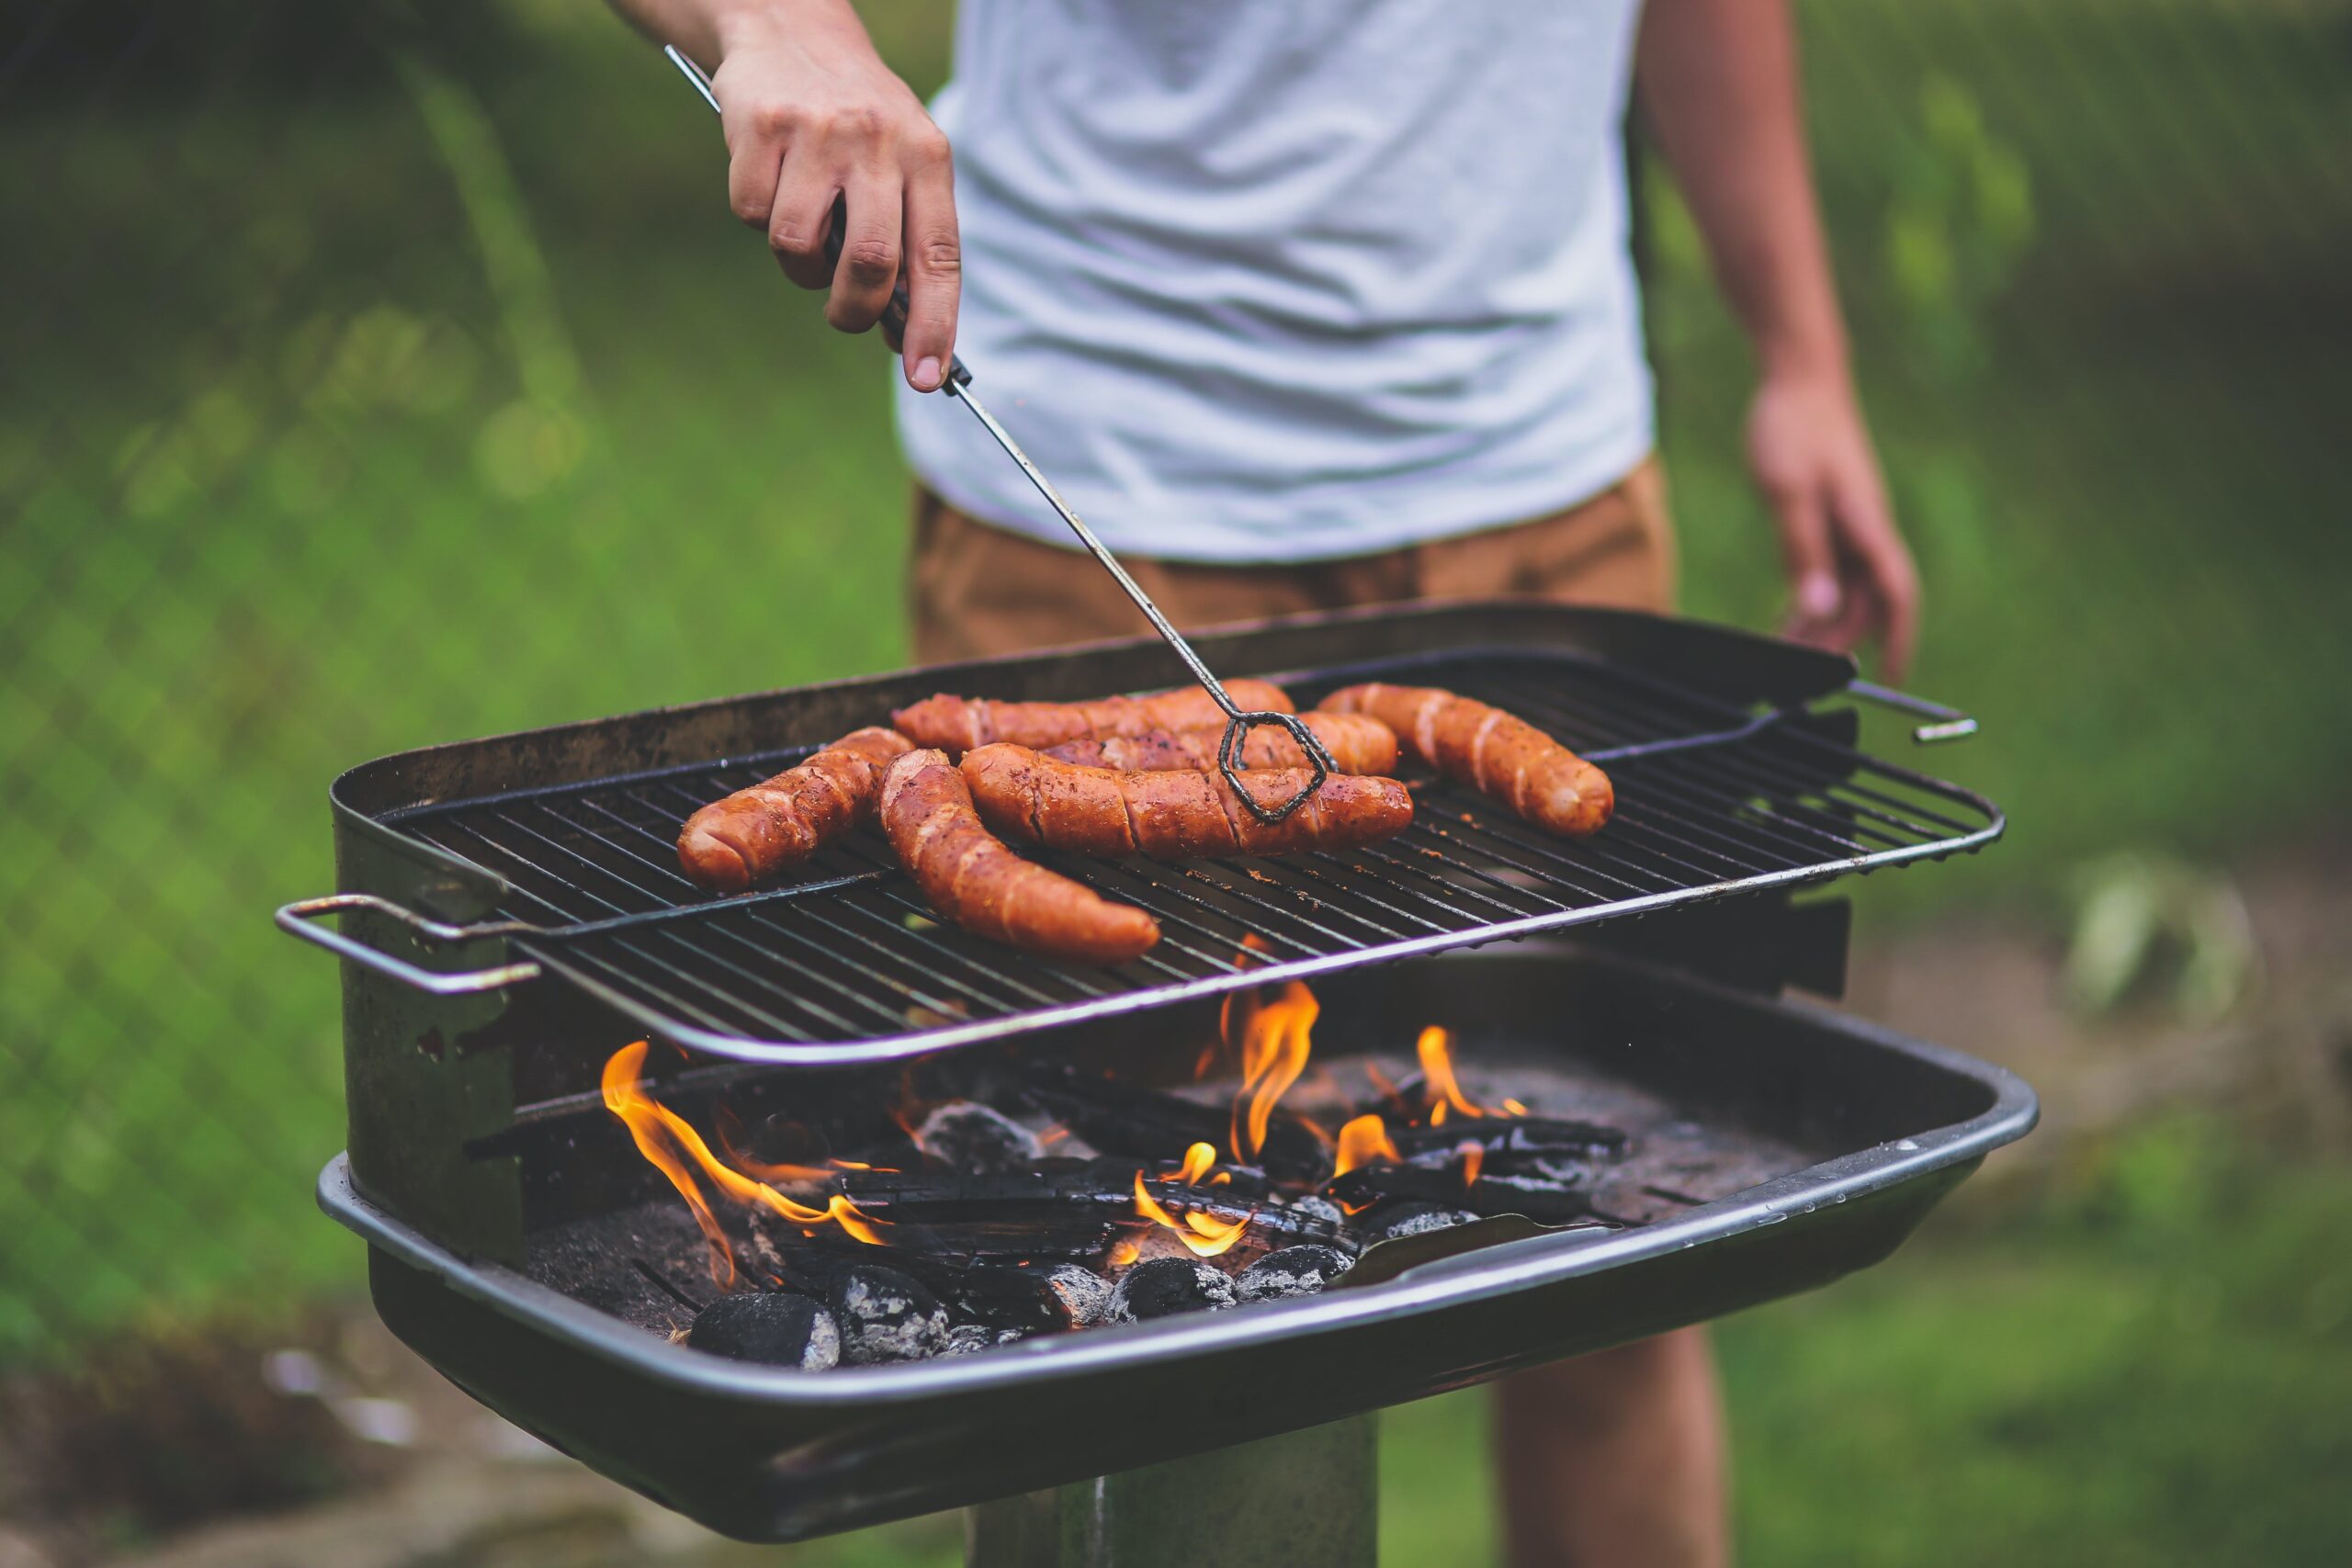 How to tune up your gas grill for dinner parties